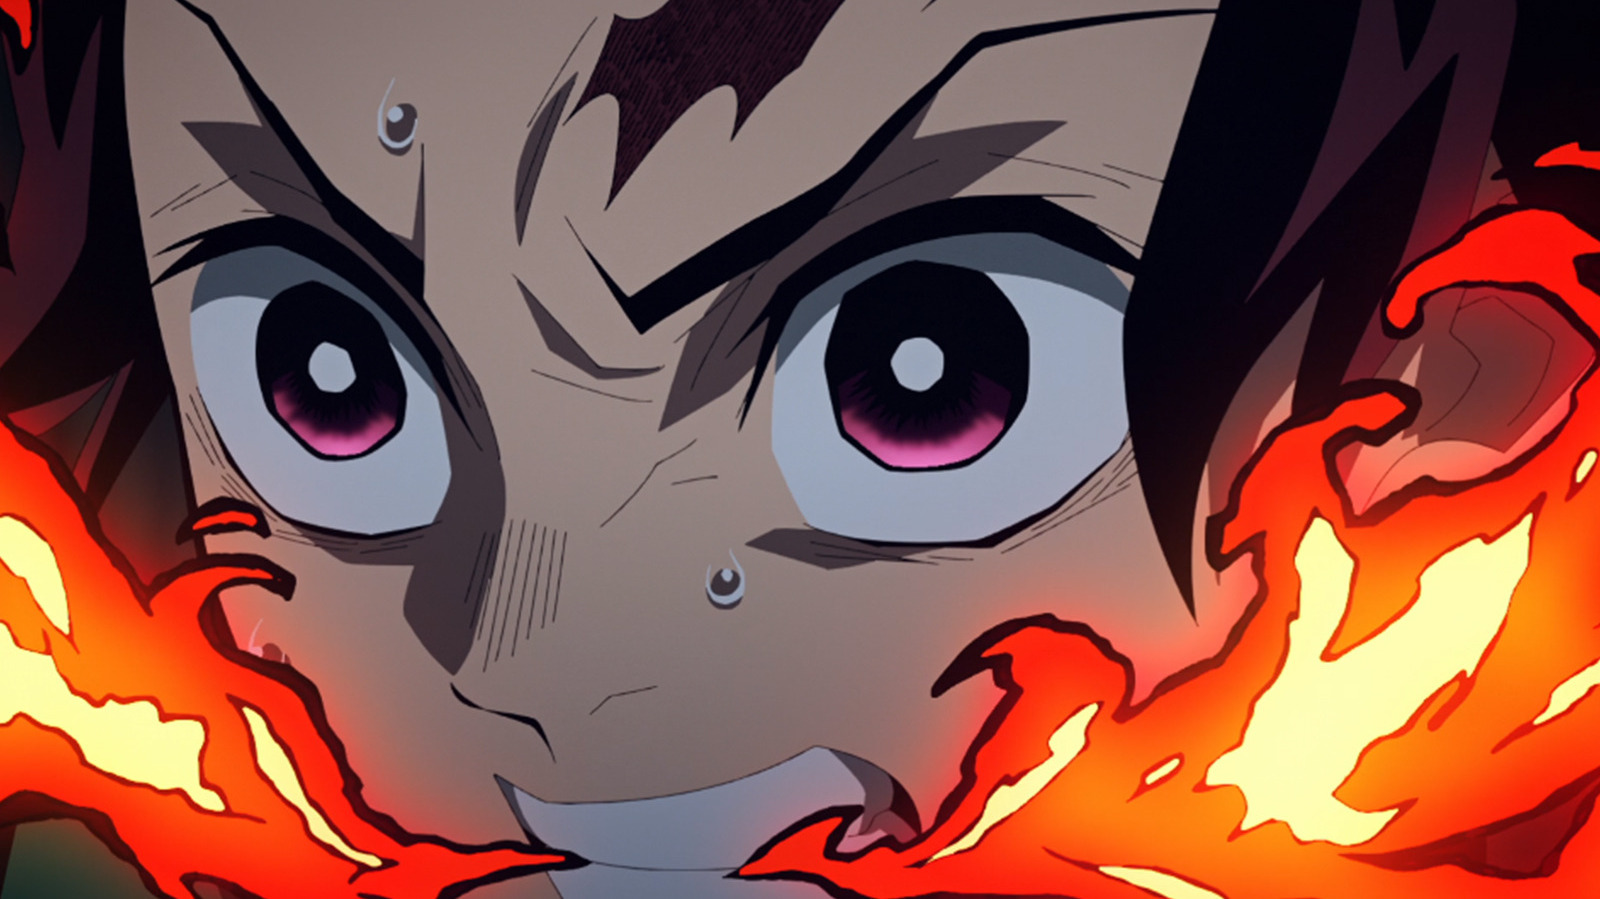 Demon Slayer Season 2 Episode 5 Review - Things Are Gonna Get Flashy